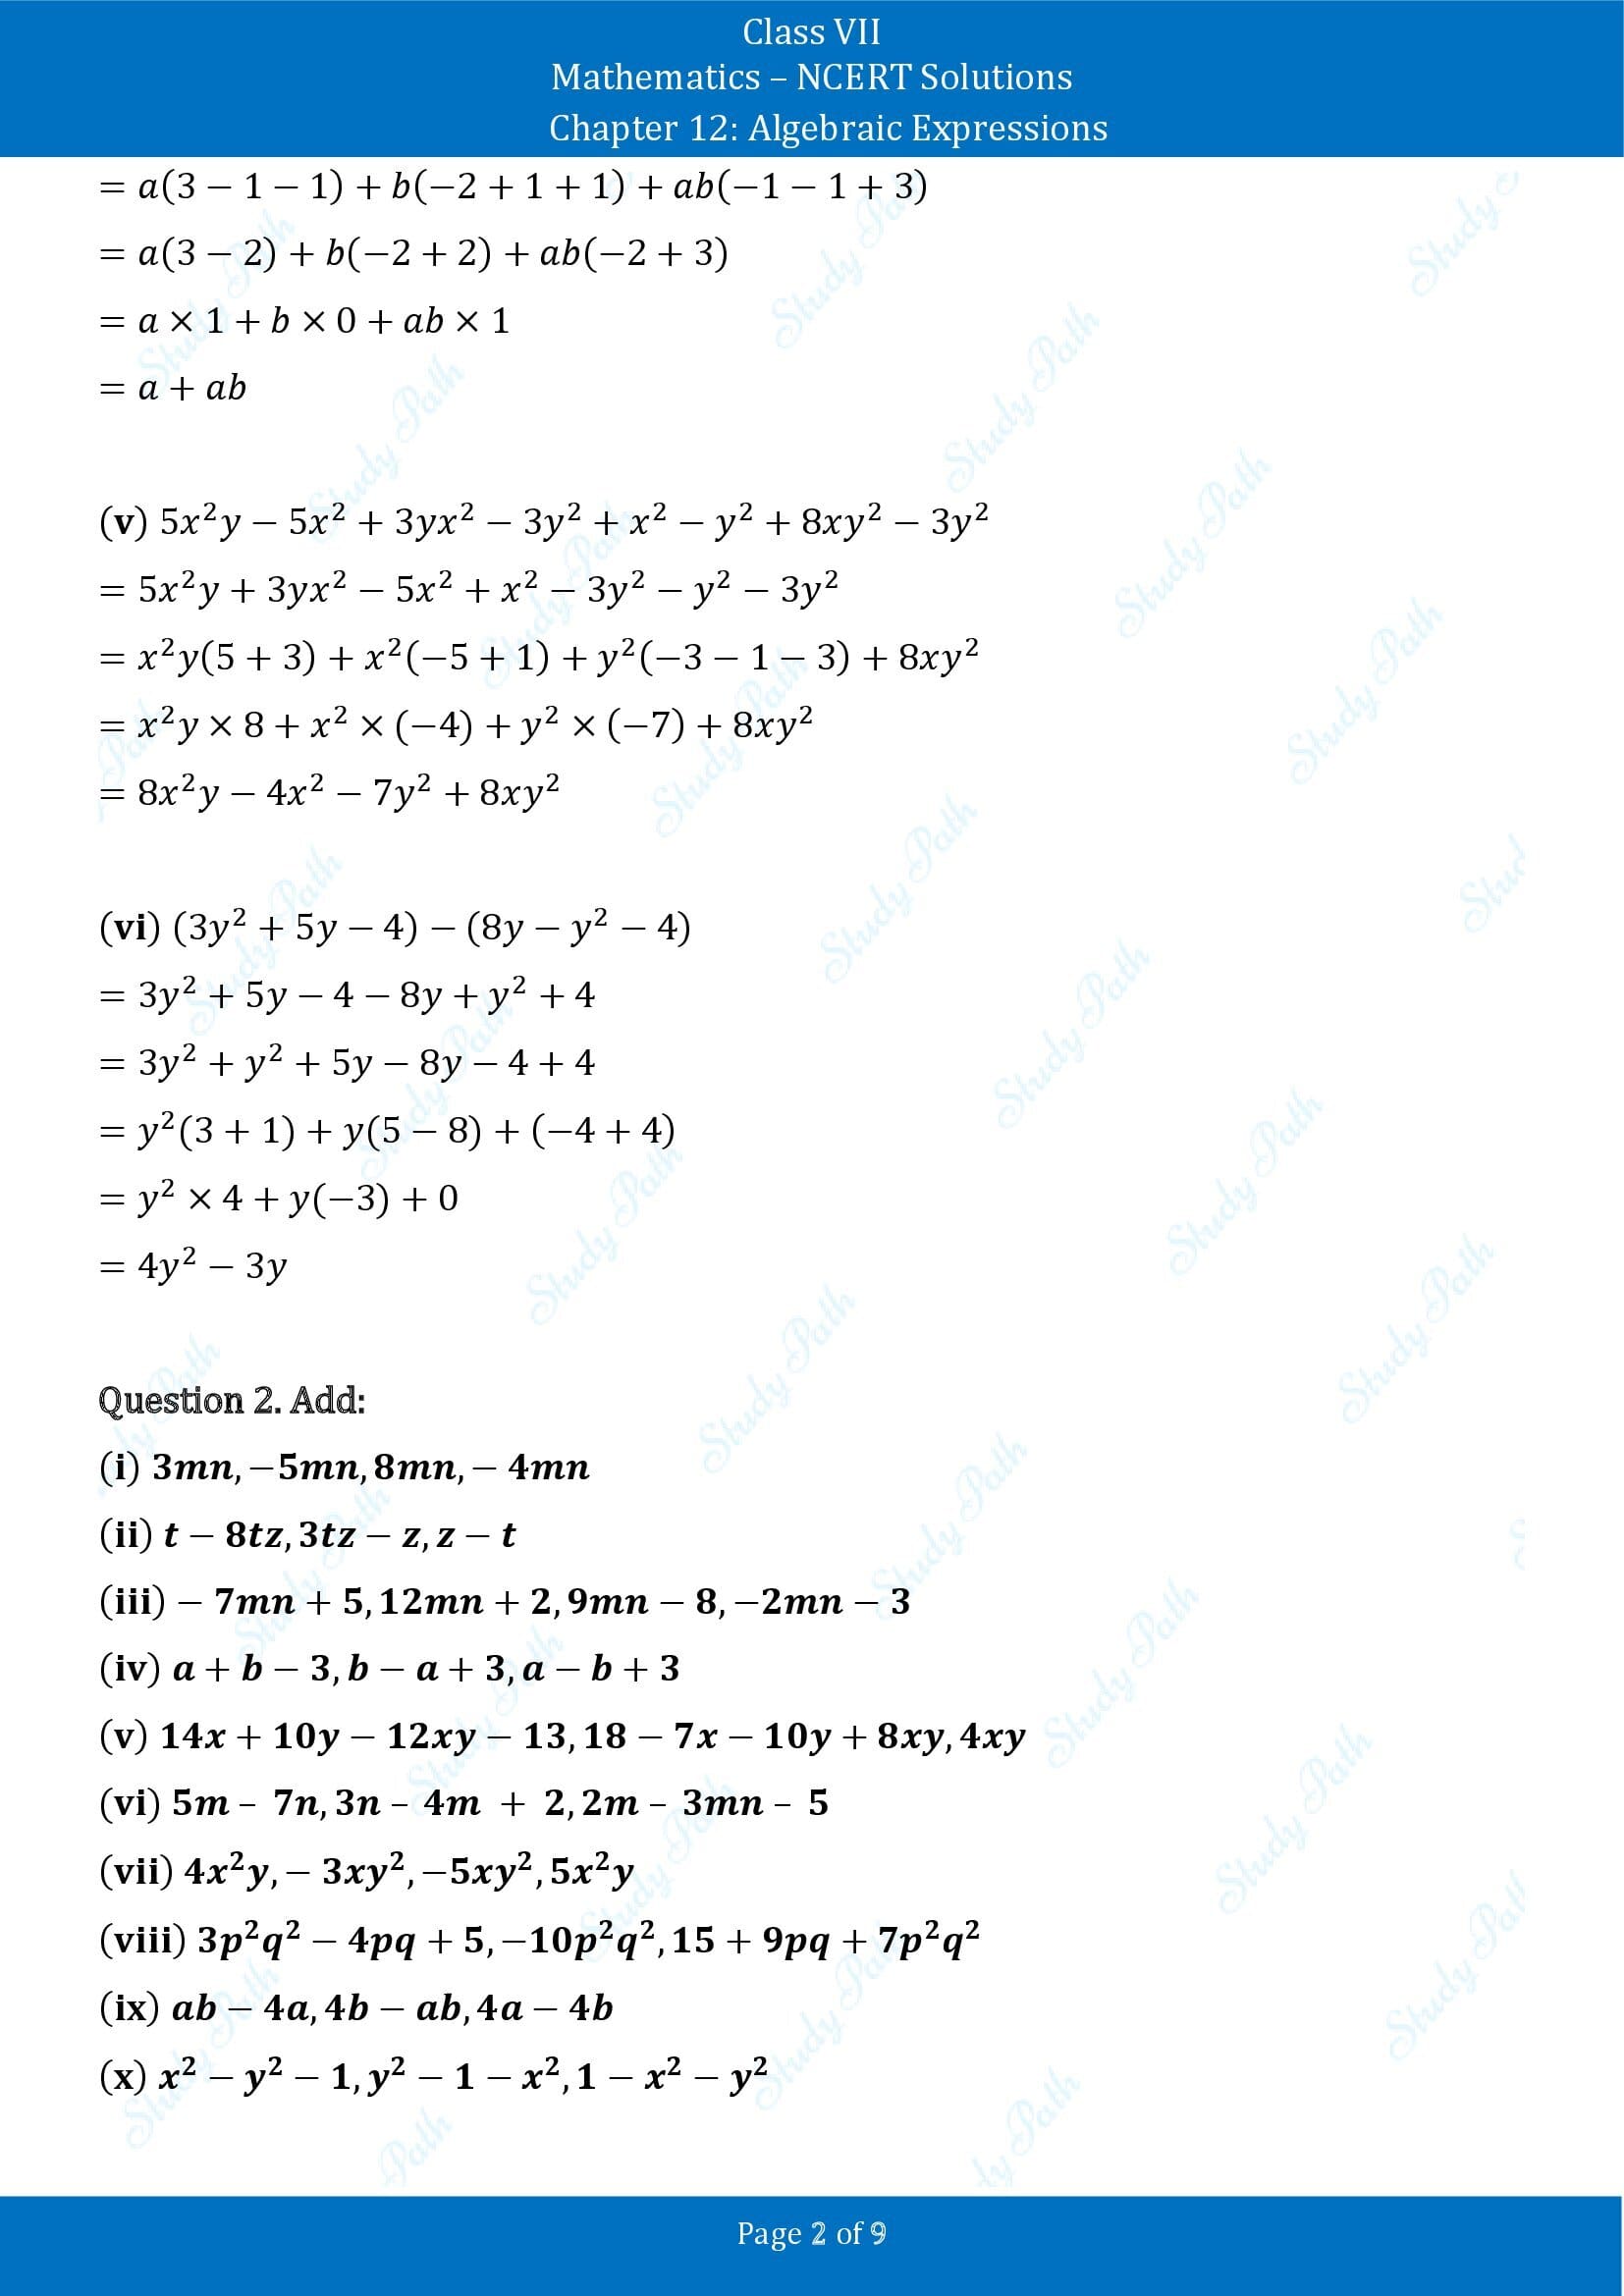 NCERT Solutions for Class 7 Maths Chapter 12 Algebraic Expressions Exercise 12.2 00002